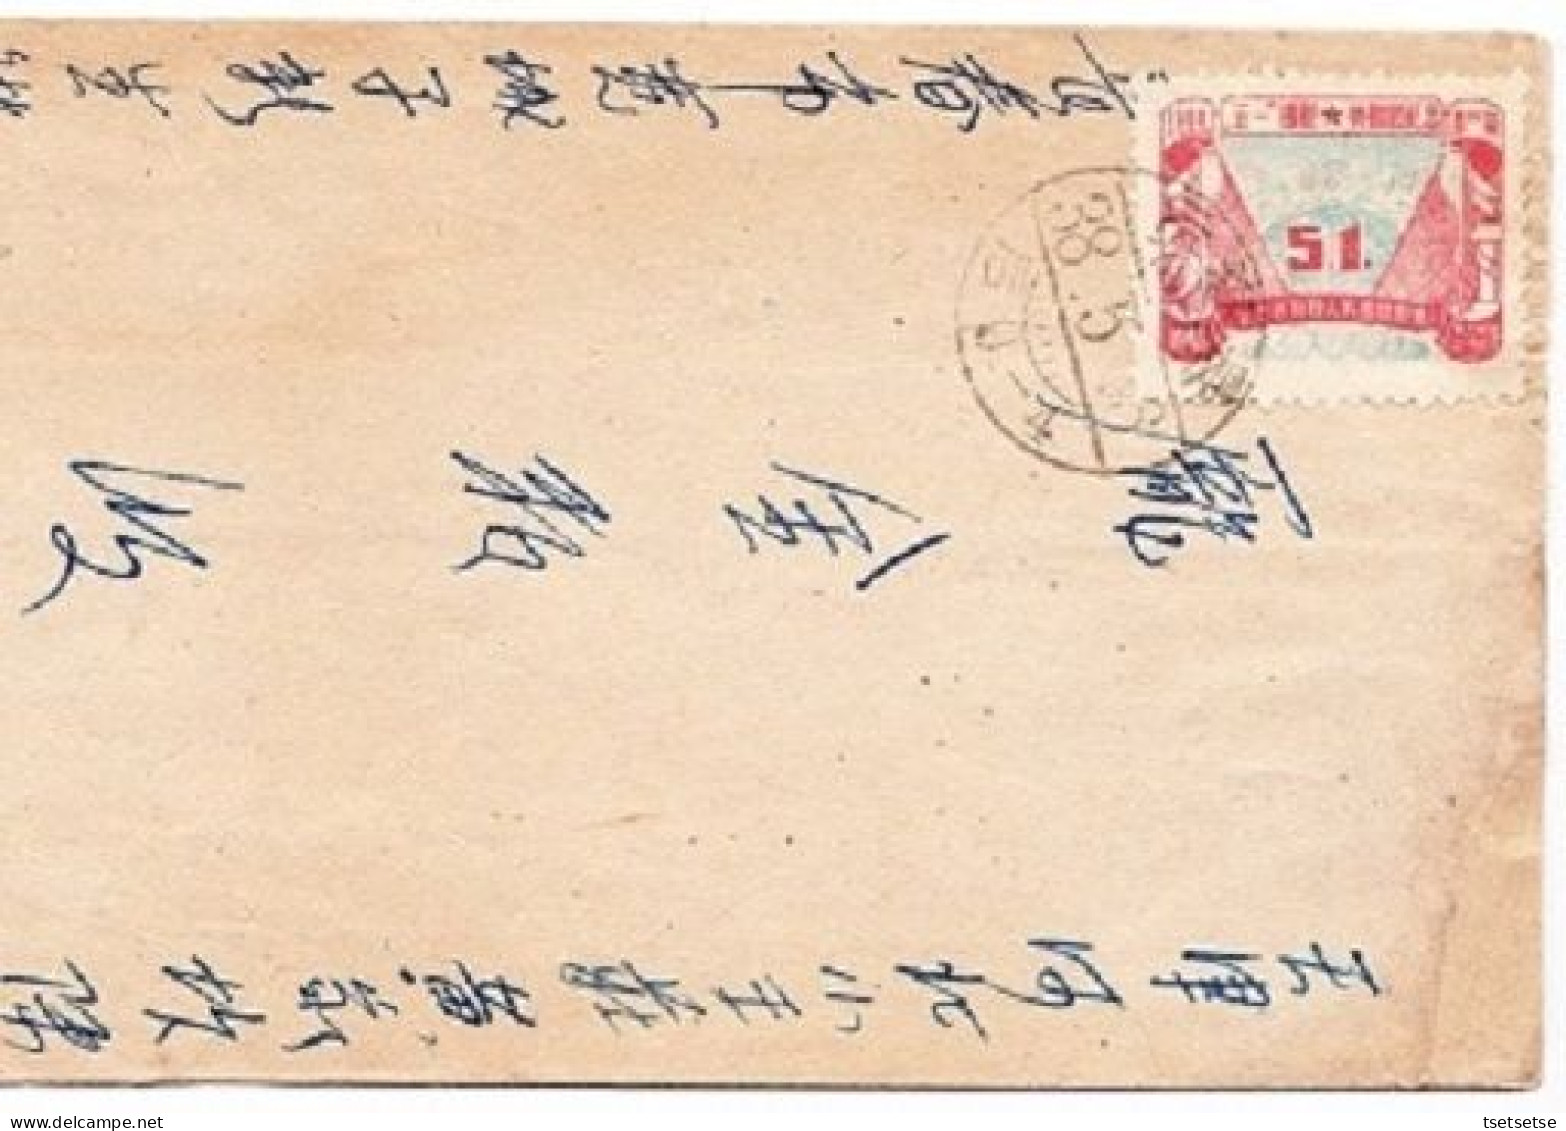 Rare! $851+! 1949 Liberated Area Cover Forerunner P.R. China NE "觧放区" Franked With Labour Day $1500 Scott #1L107 Stamp - Nordostchina 1946-48